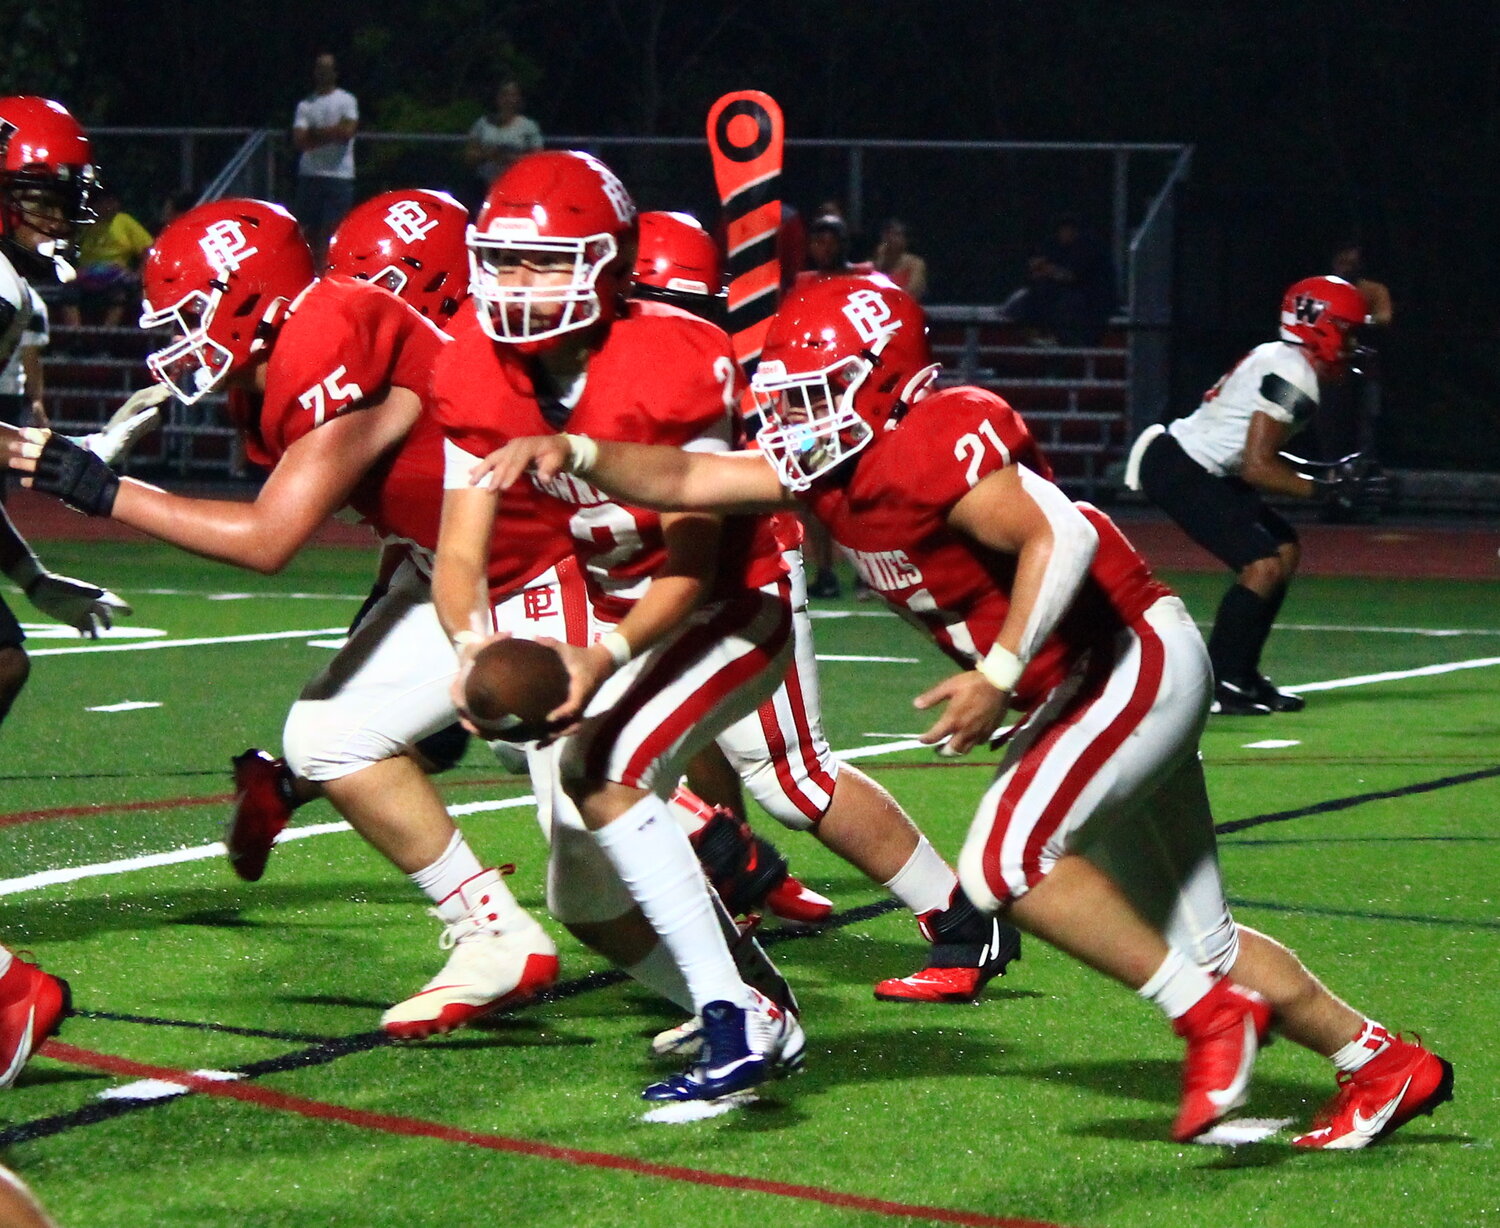 The backfield tandem of quarterback Jacob Duarte and fullback Steven Clark Jr. are expected to be among the leaders of the 2023 East Providence High School football team.